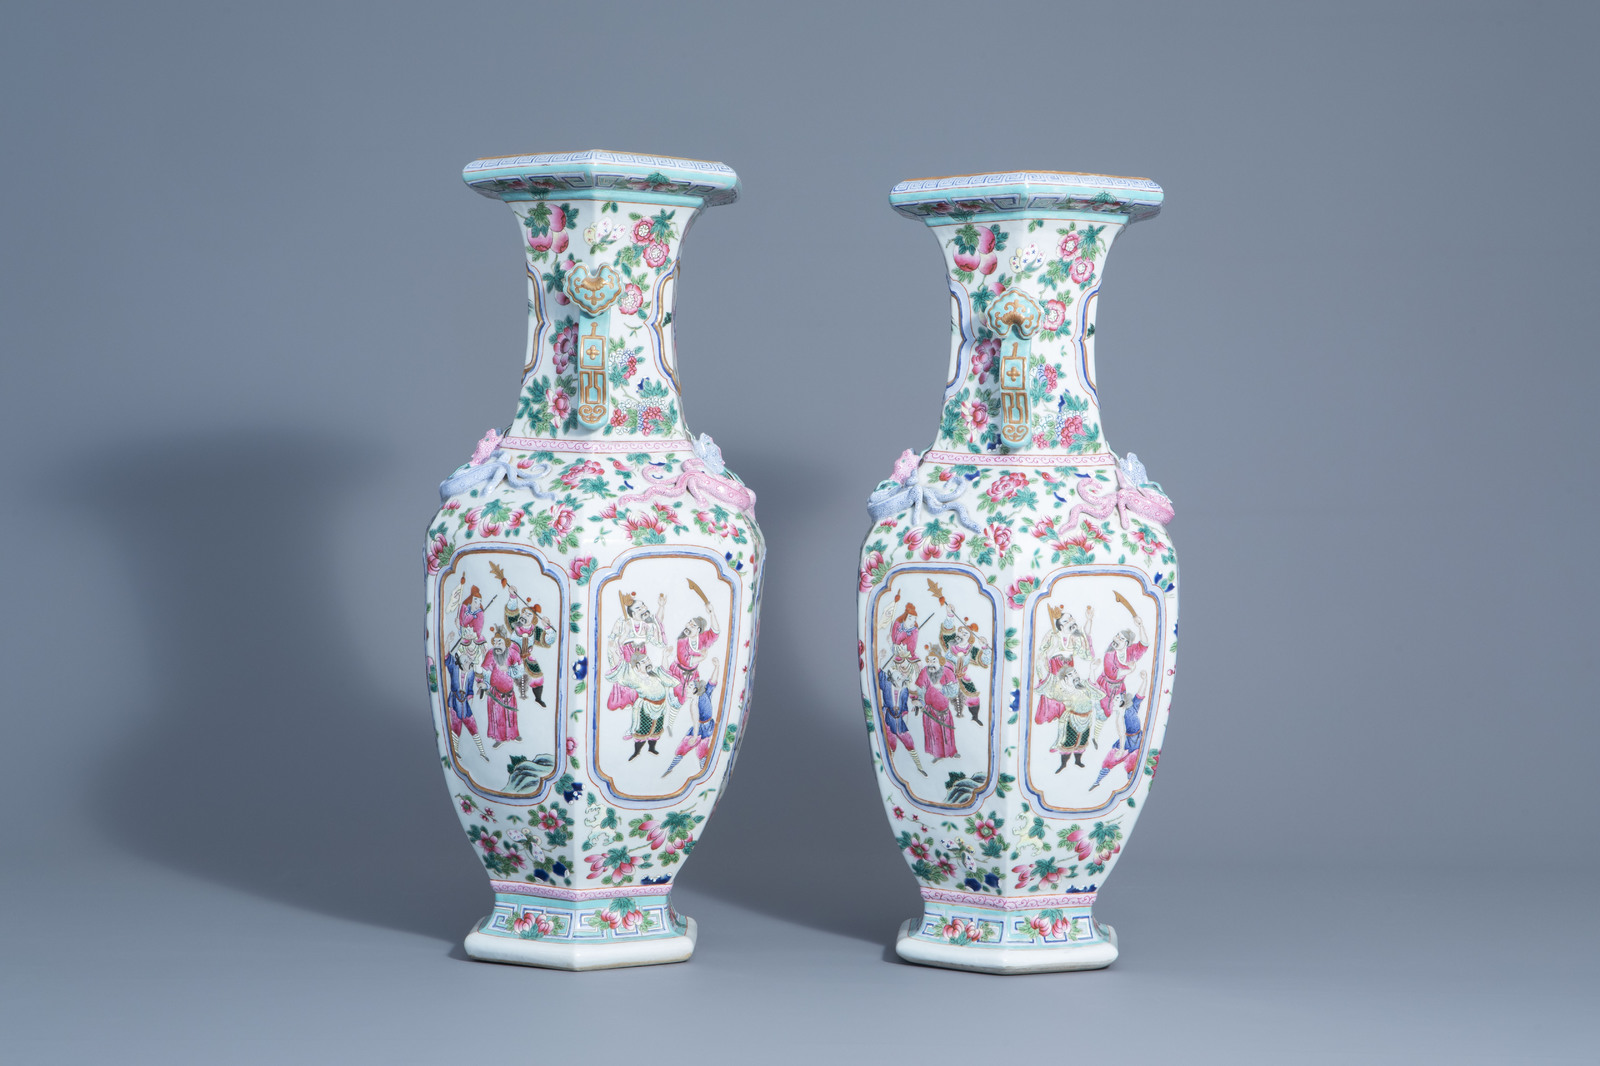 A pair of hexagonal Chinese famille rose vases with warrior scenes and floral design, 19th/20th C. - Image 2 of 6